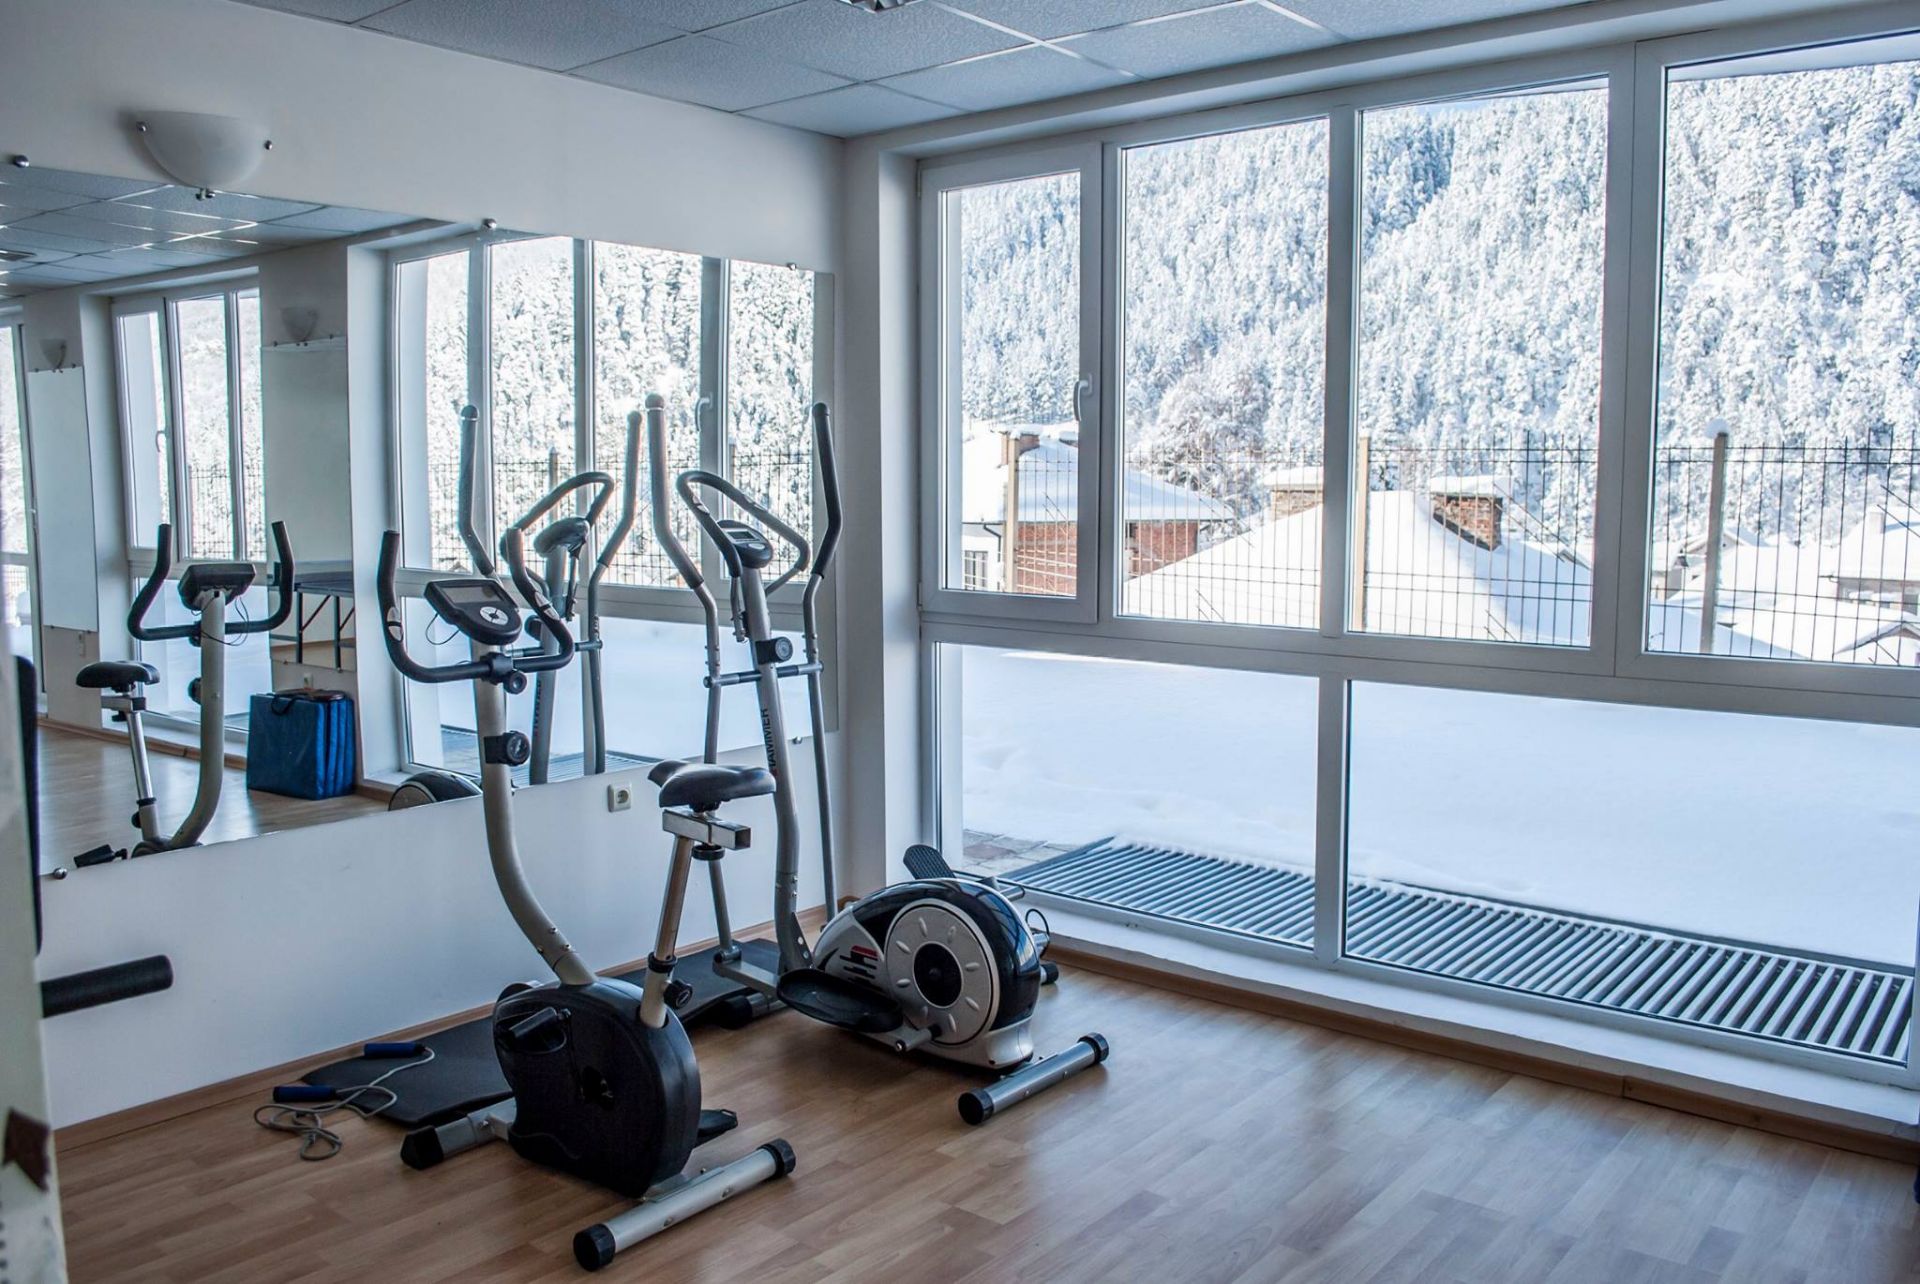 Large leisure centre/SPA (OR BIGGEST APARTMENT IN BULGARIA new mountain apartment complex Borovets - Image 26 of 38